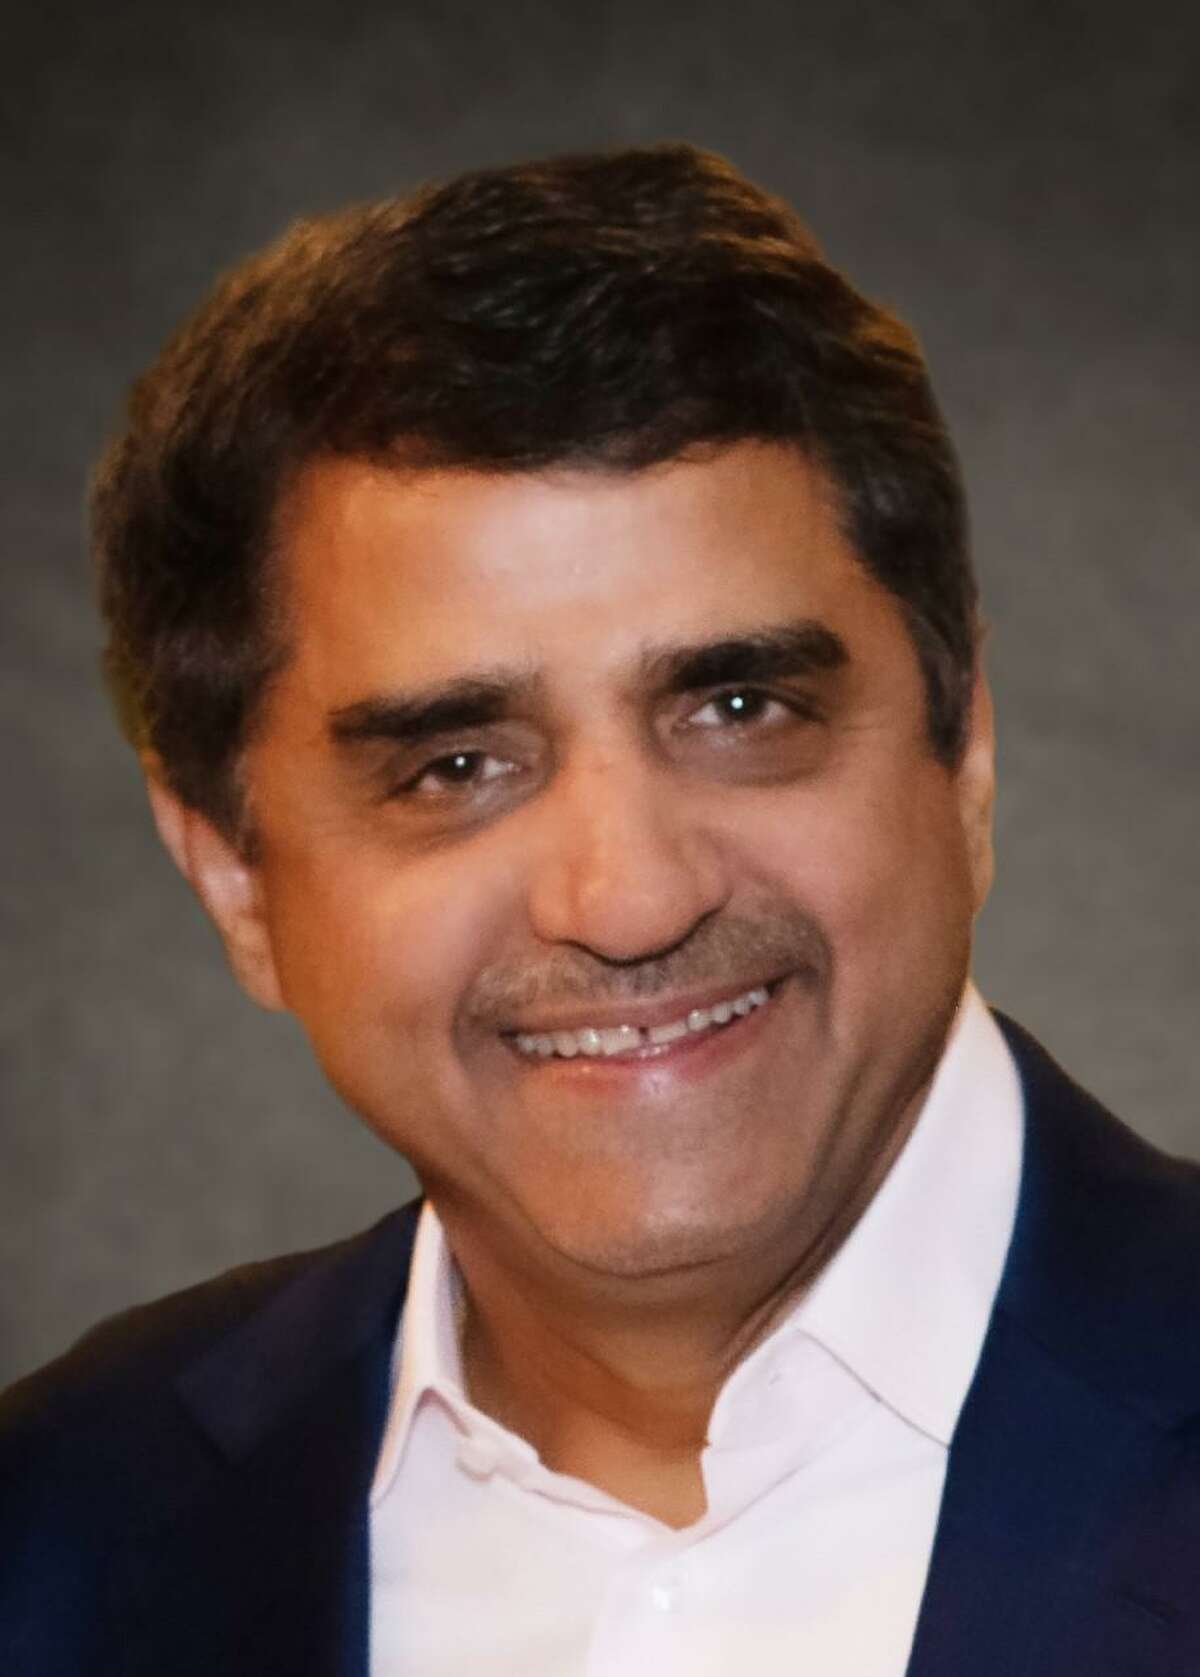 Vimal Mehta, BioXcel’s chief executive officer